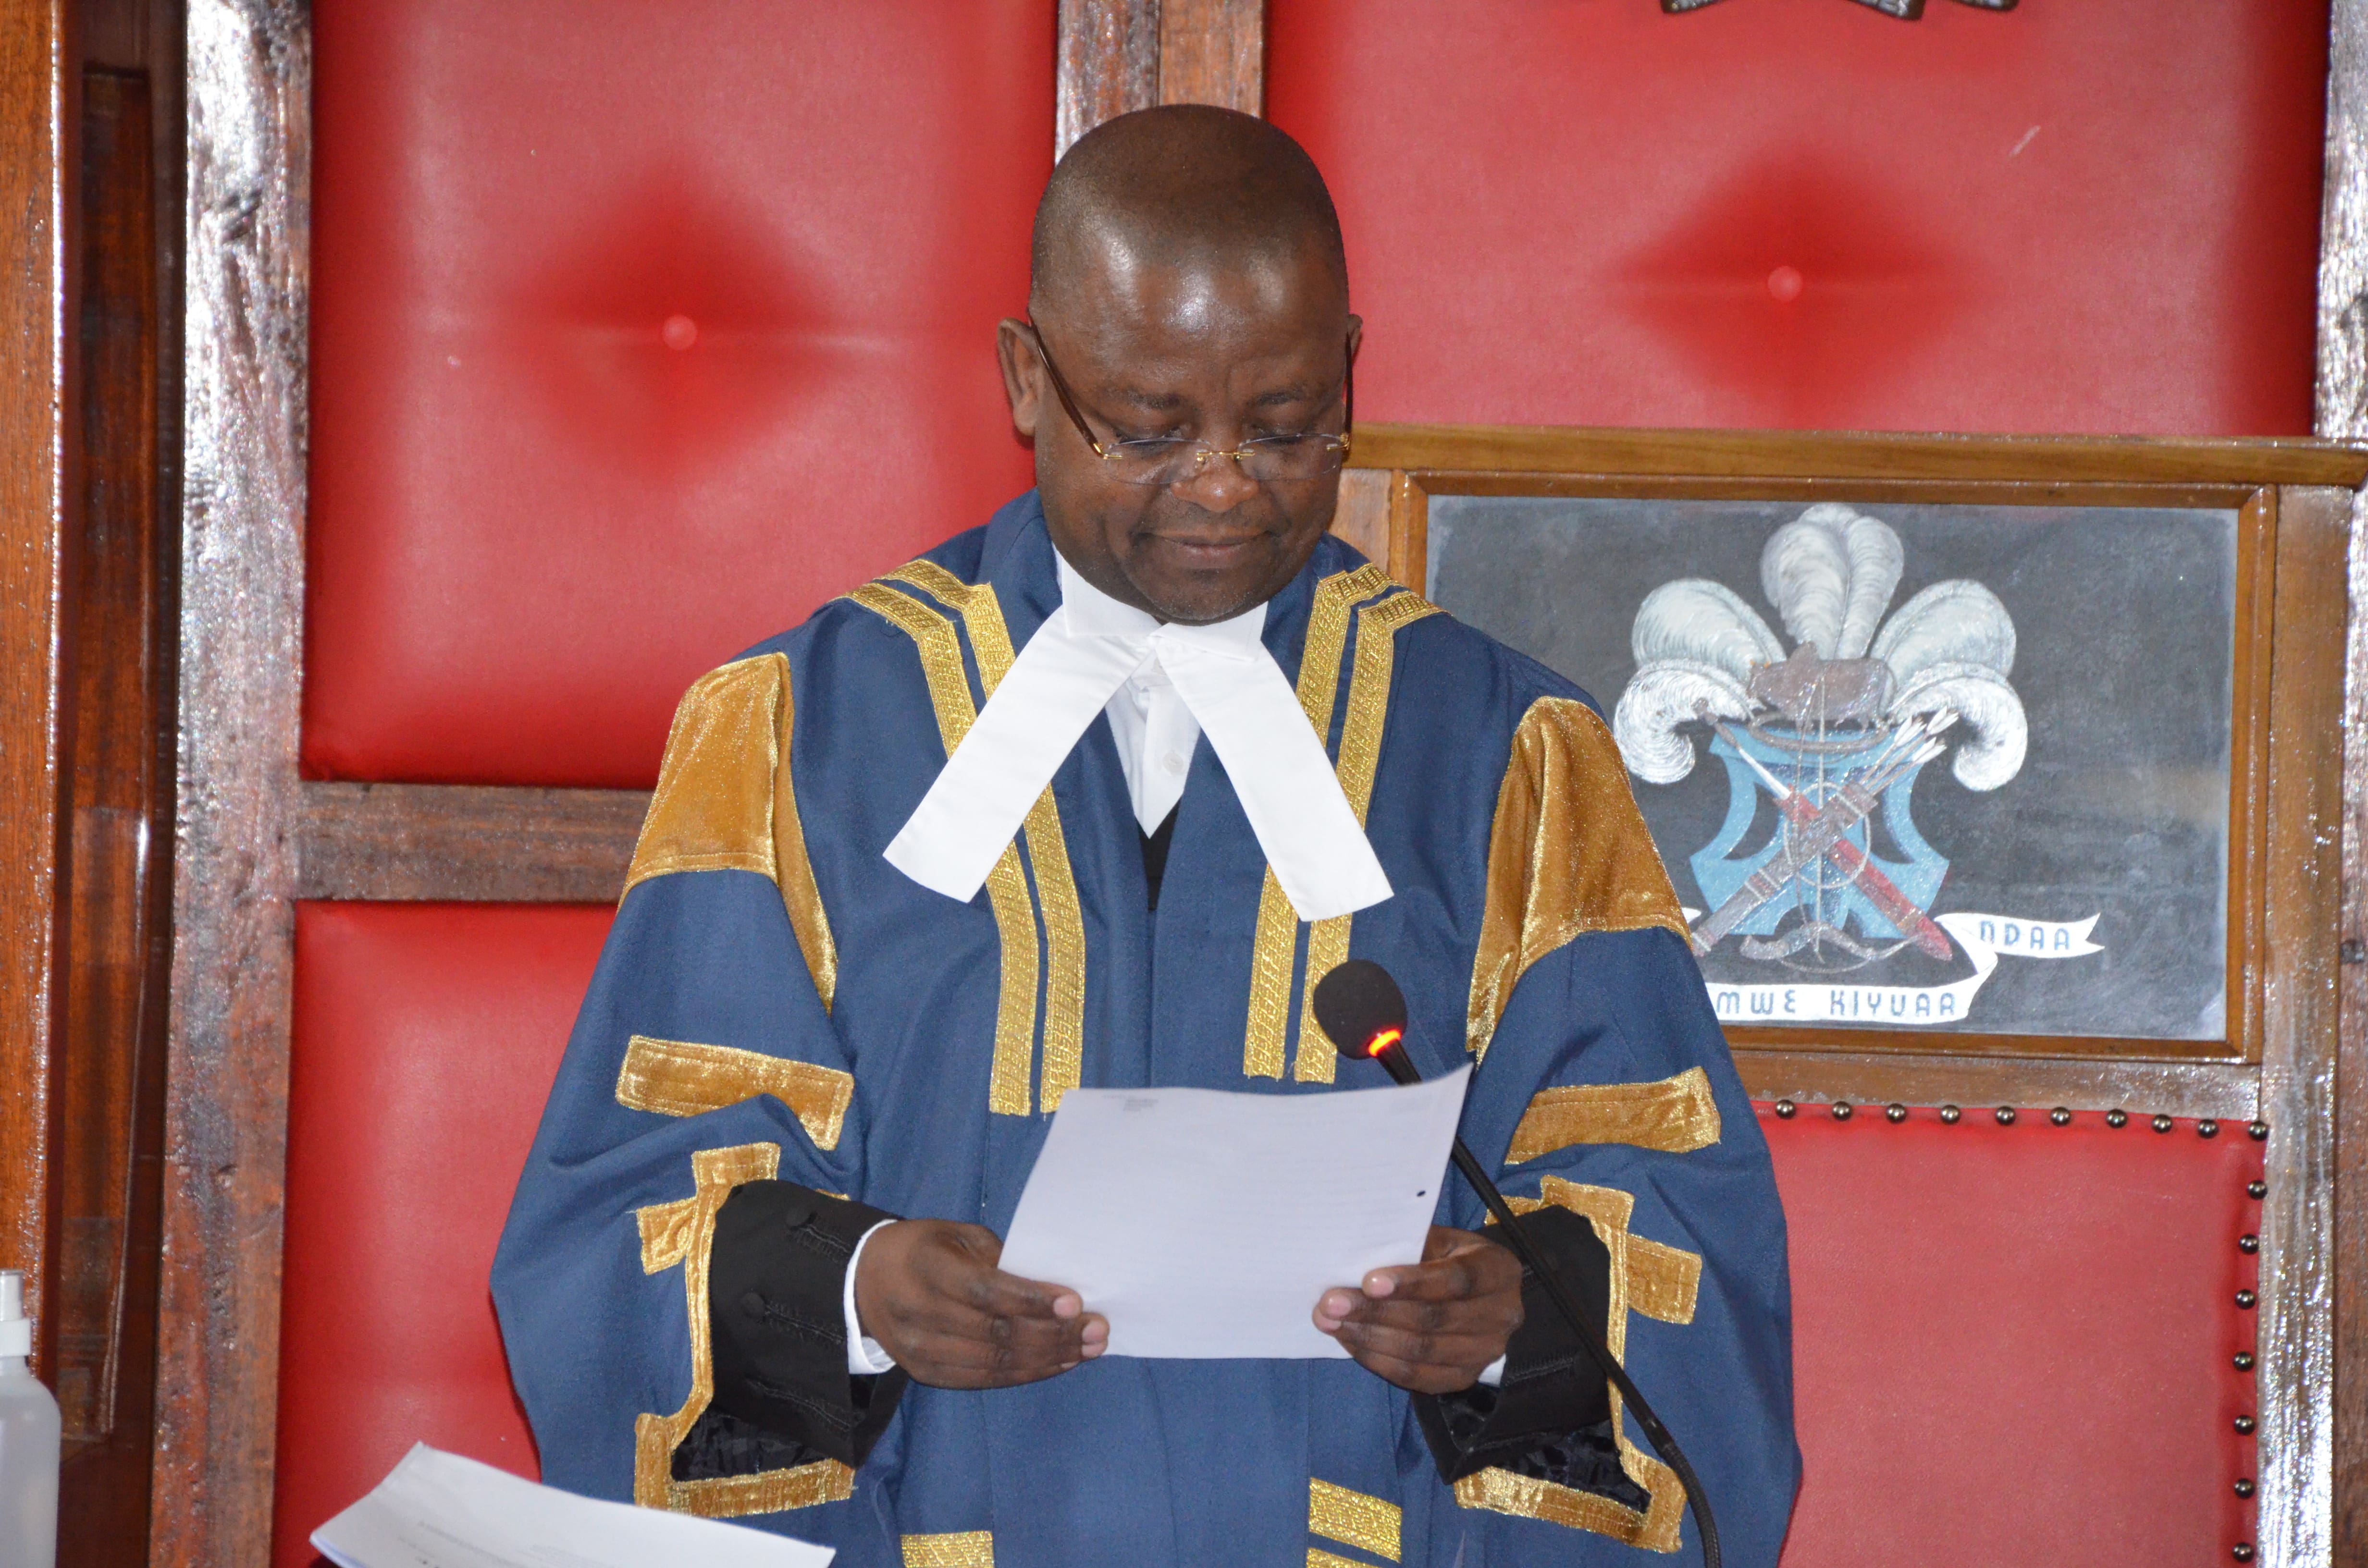 The Clerk to the County Assembly, Mr. J. L. Mutisya